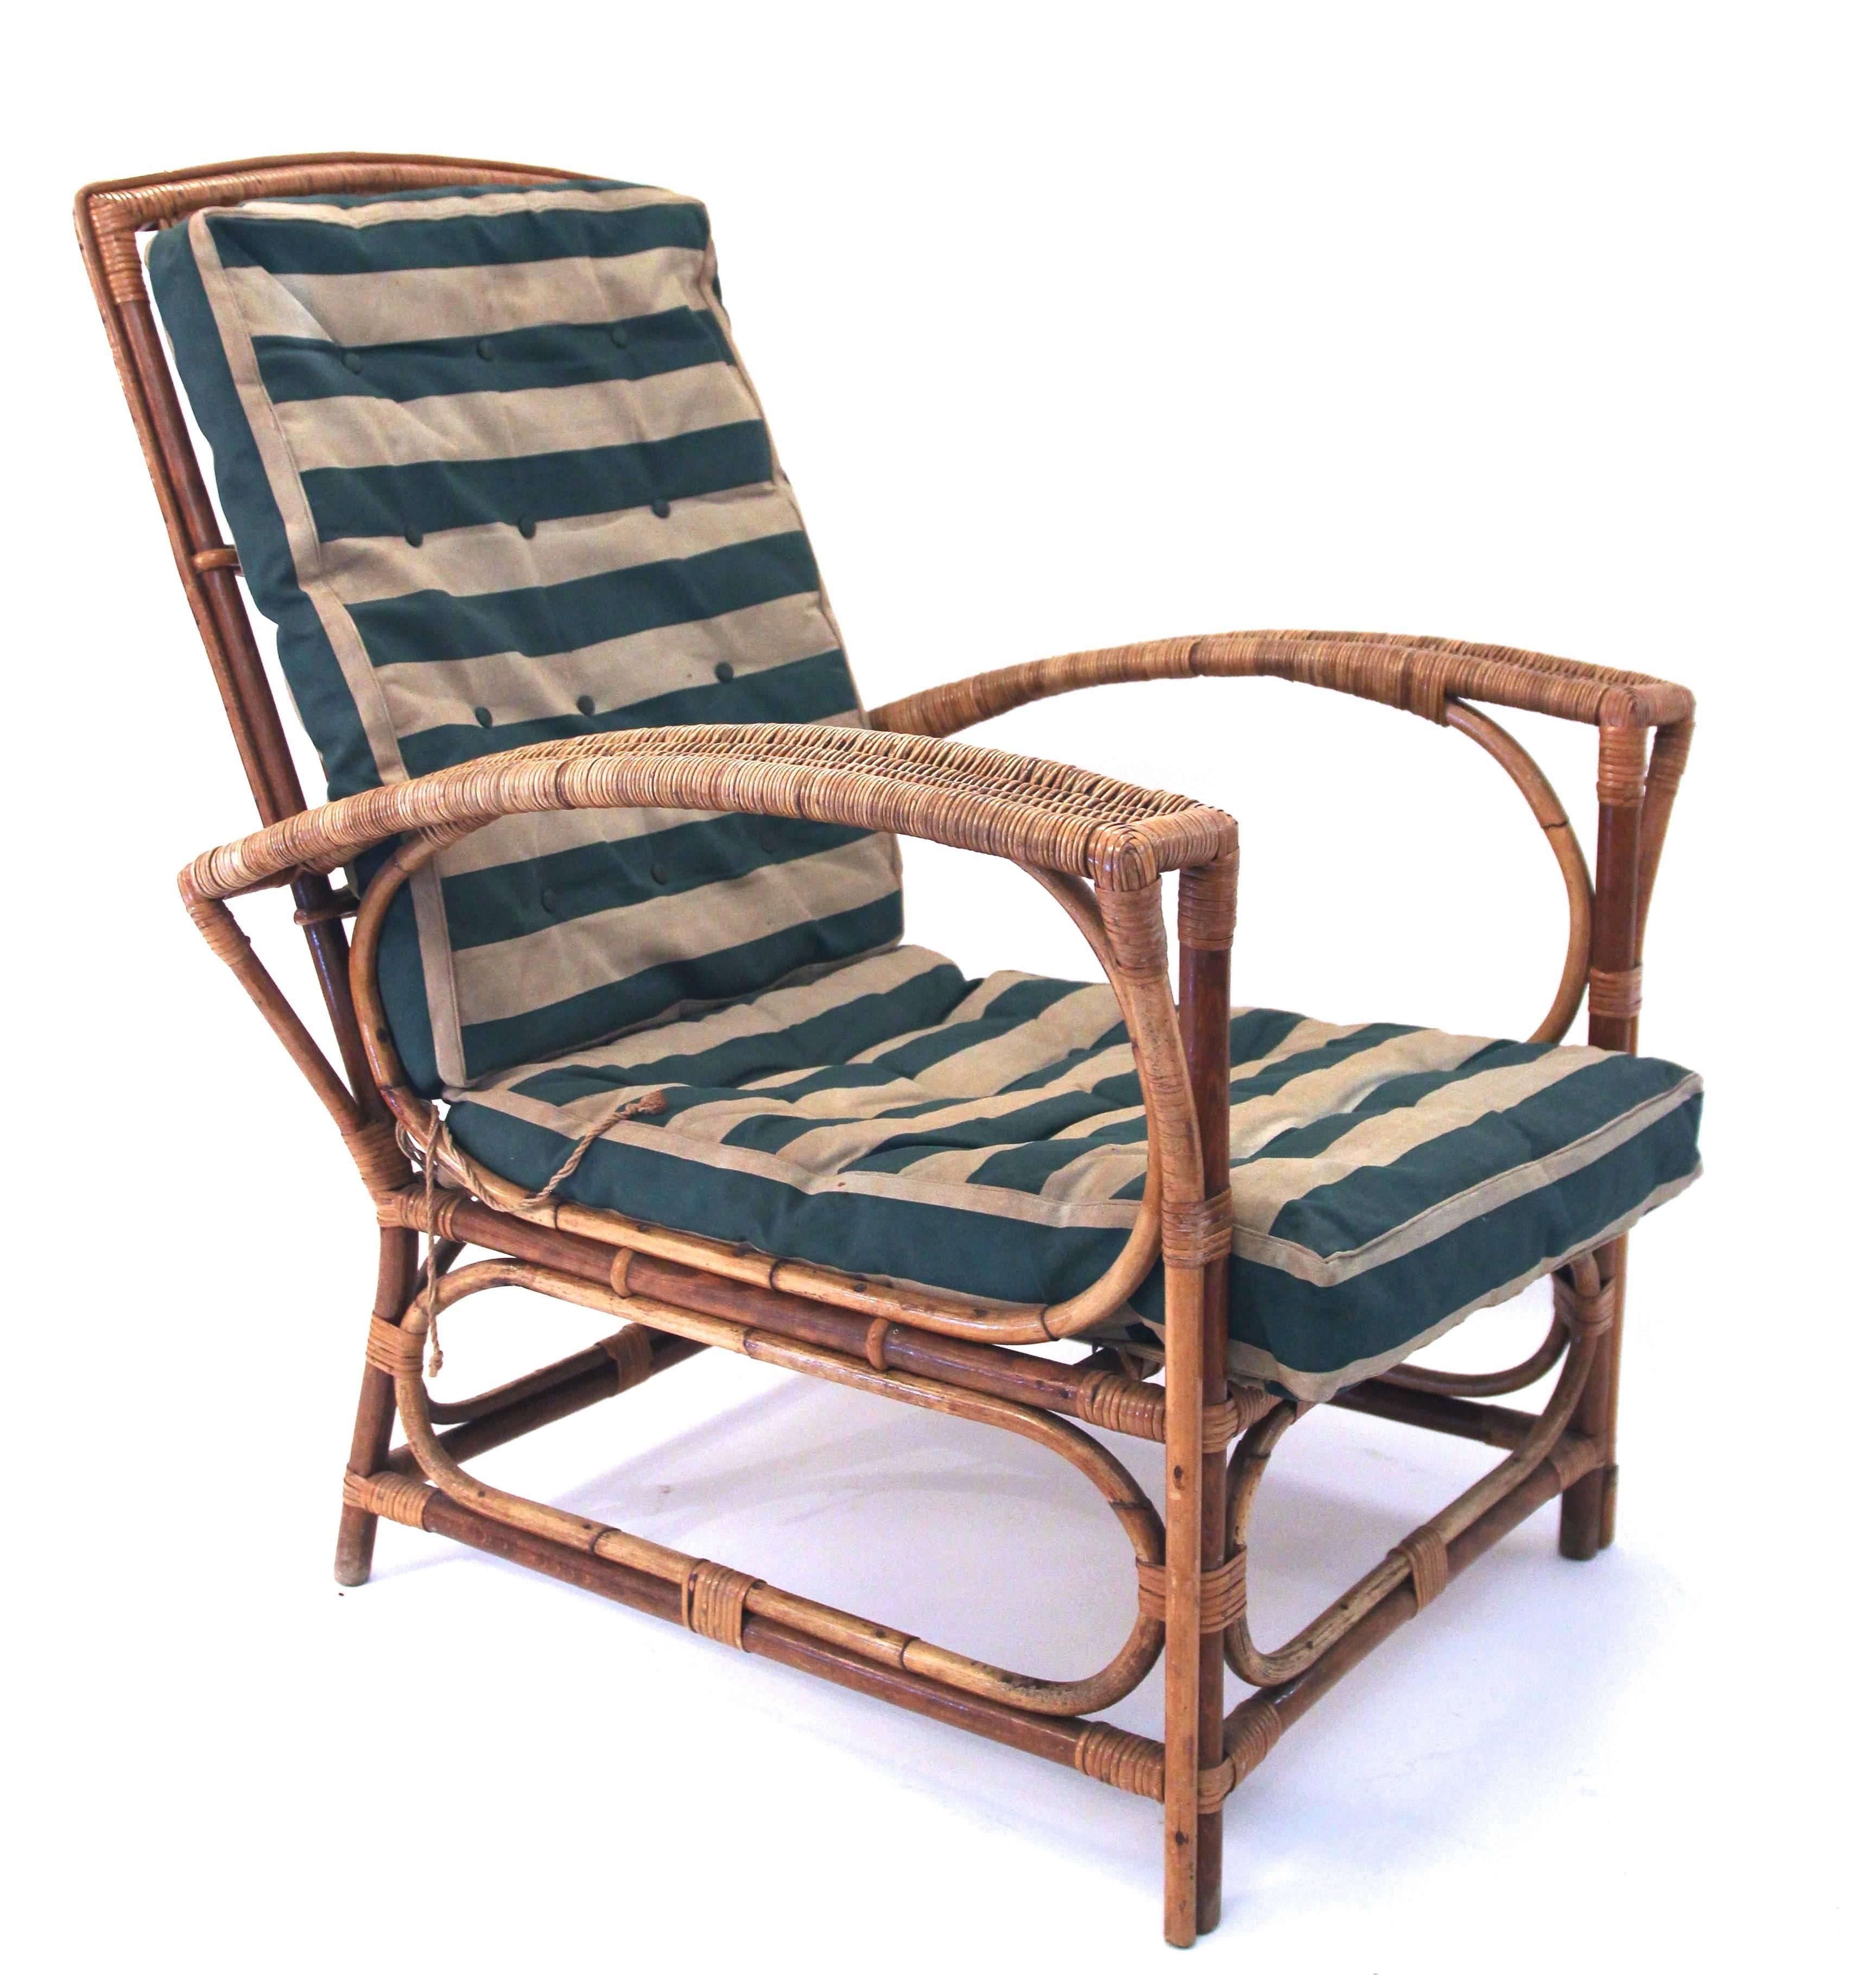 Set of four chairs and center table,
rattan,
circa 1960, France.
Measures: Armchair height: 96 cm seat height: 33 cm, width 74 cm, depth: 71 cm.
Table: height: 67 cm, diameter 62 cm.